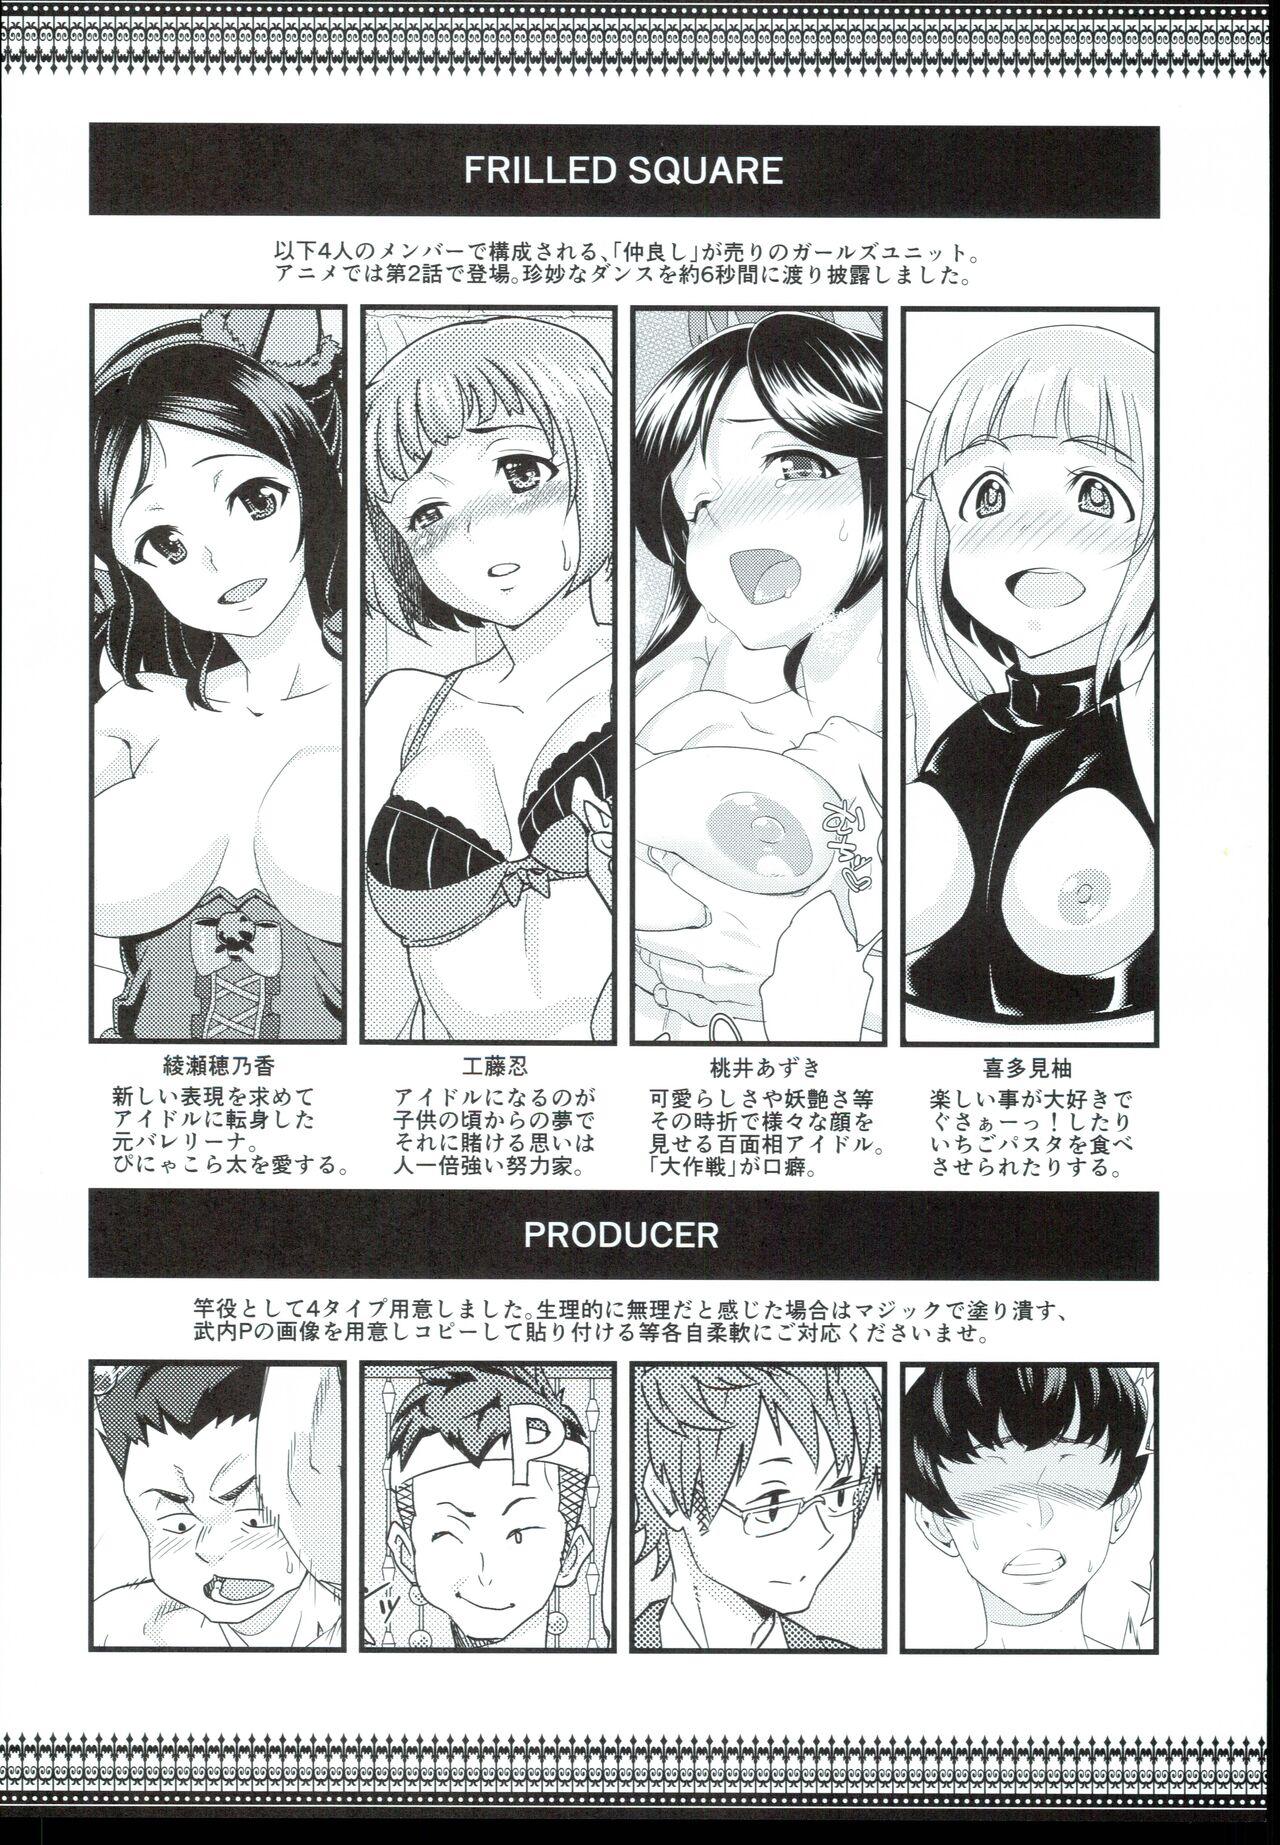 Porn Sluts FRILLED SQUARE no Erohon FRISQE - The idolmaster One - Page 4